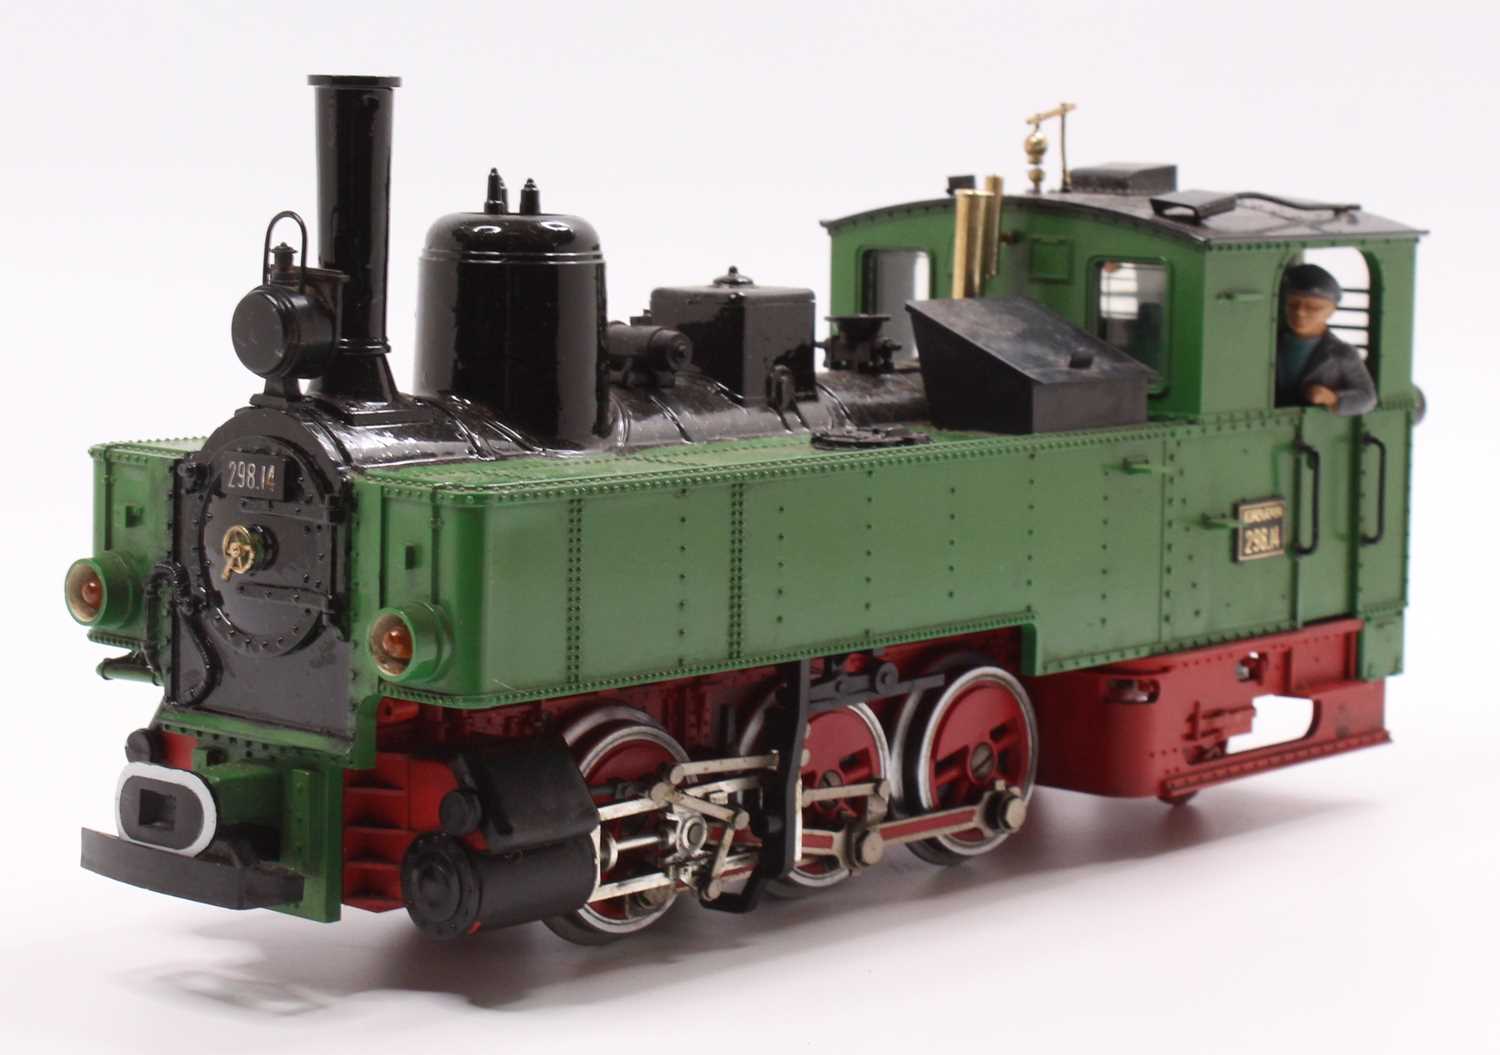 LGB no. 2073 0-6-2 loco running no. 298.14, red chassis green cab, model has been overpainted - Image 2 of 10